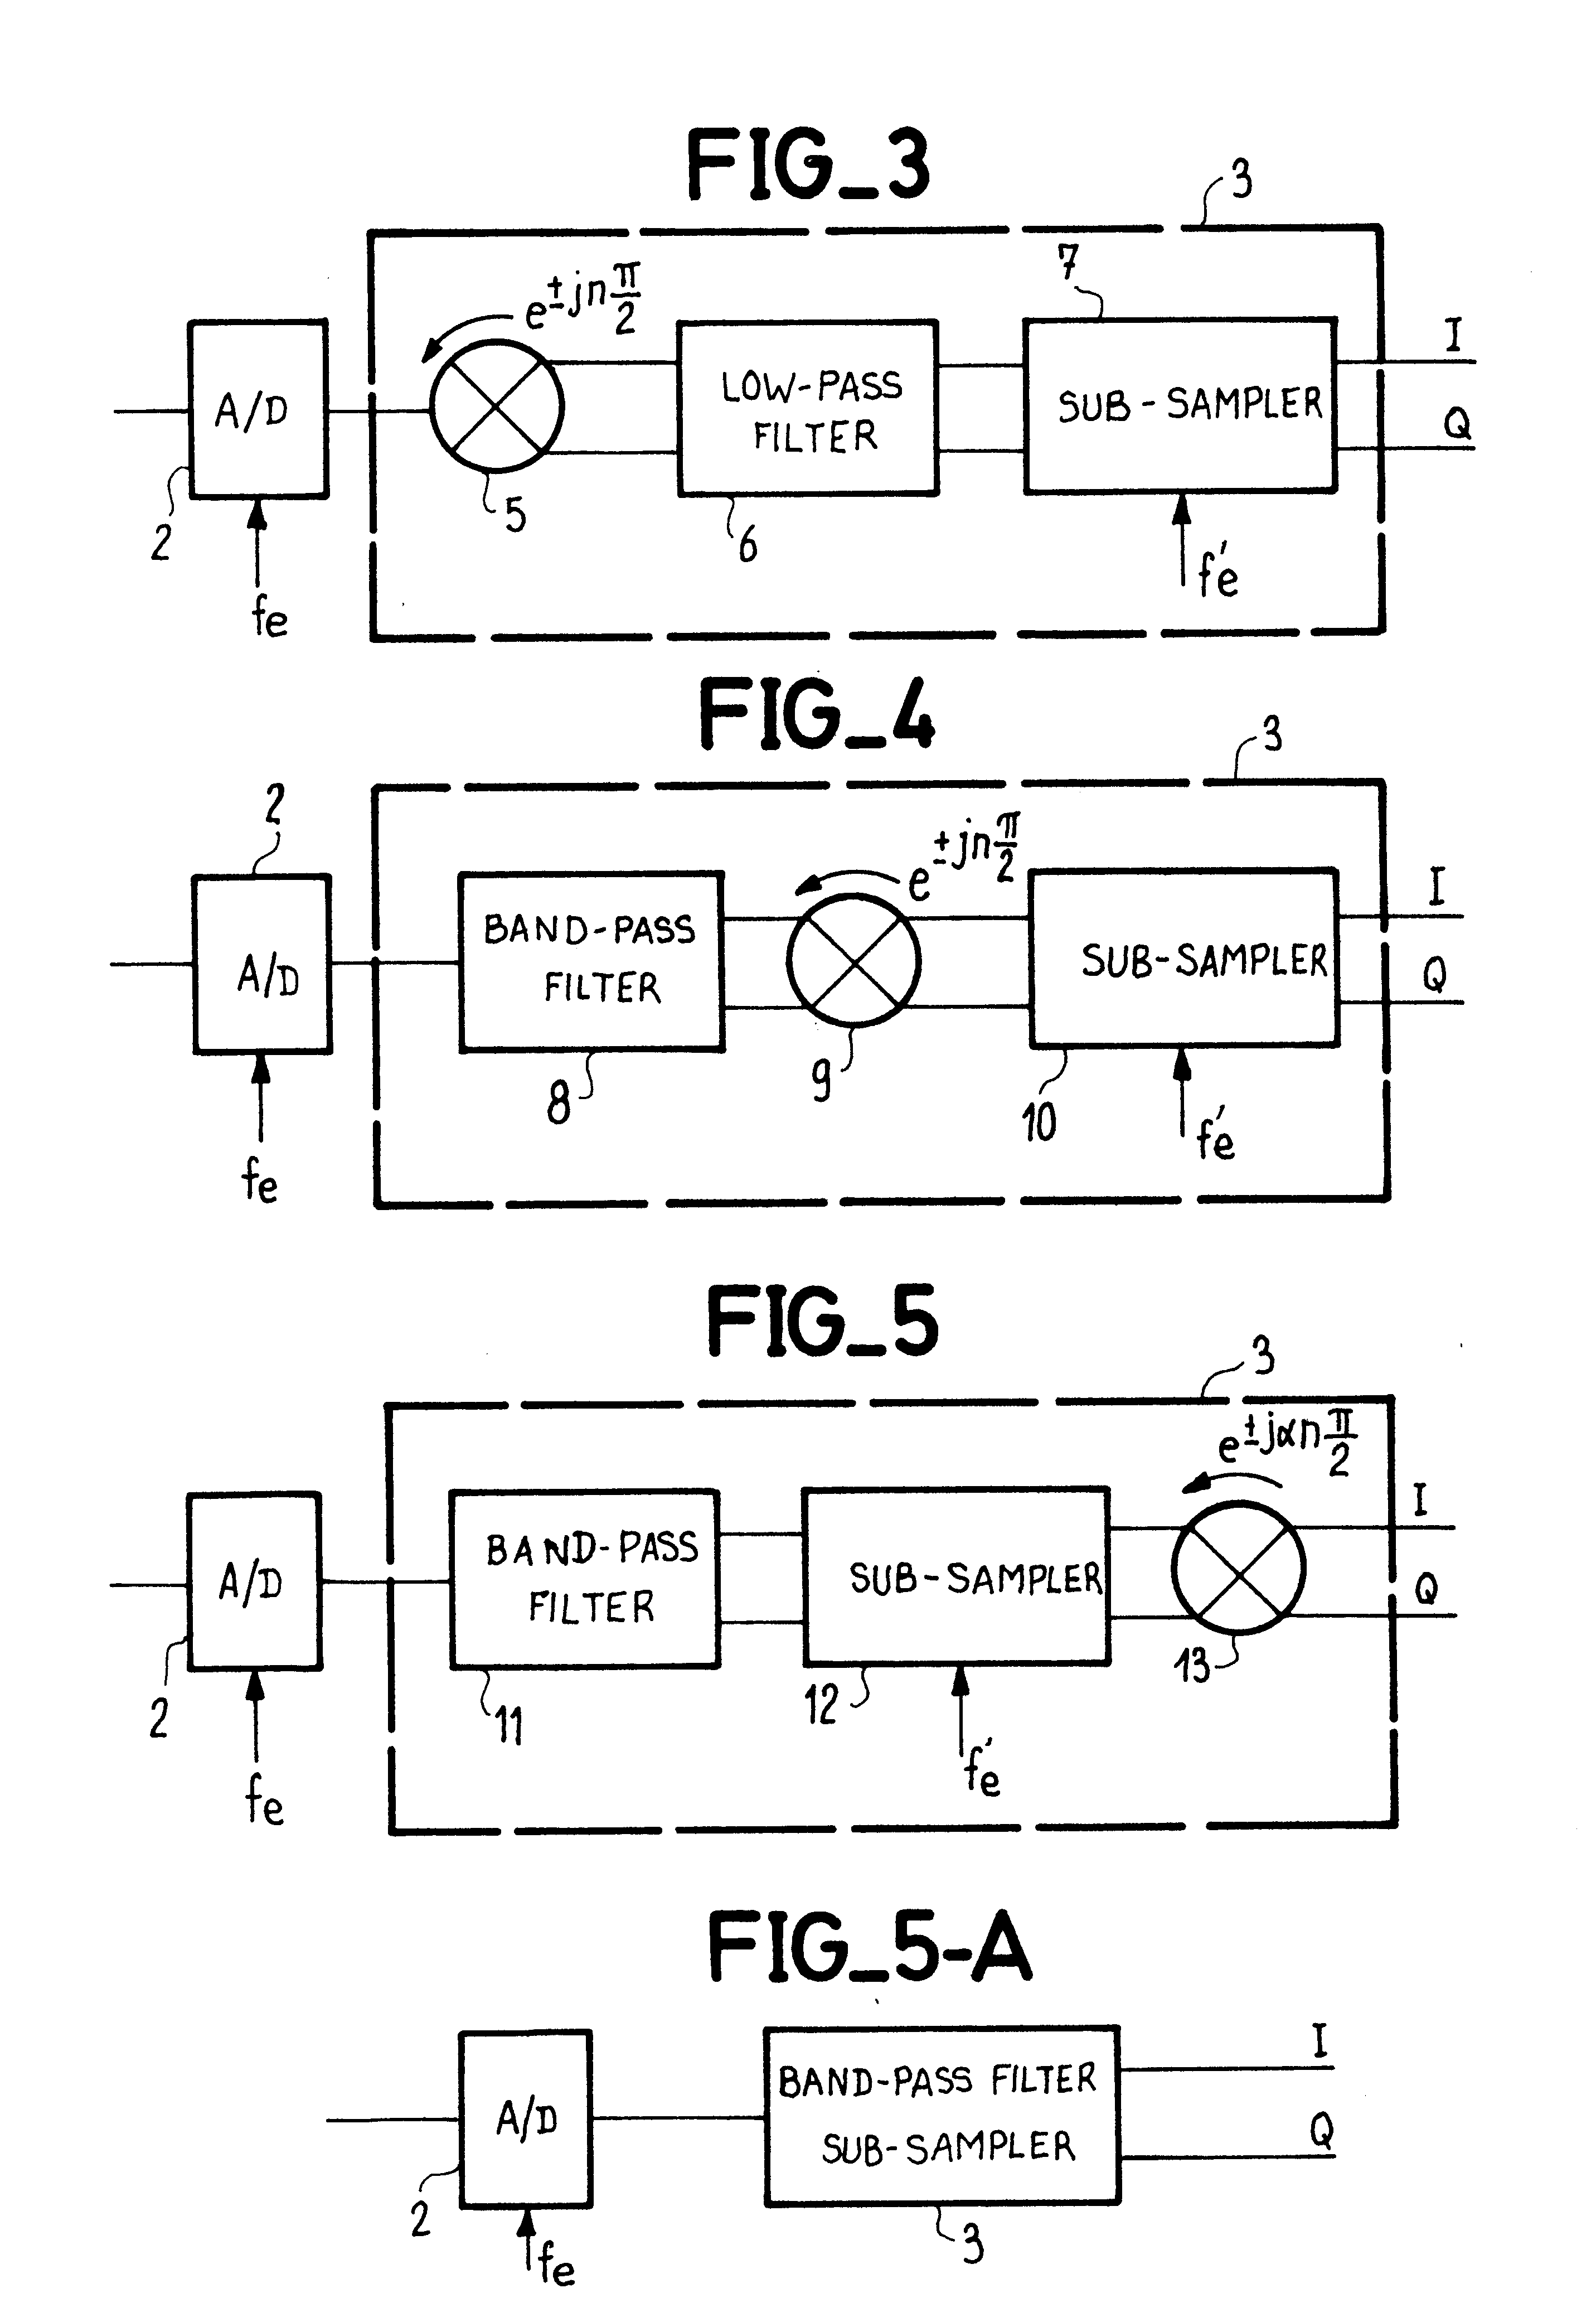 Process for the phase amplitude demodulation of a received radar signal and device implementing such a process